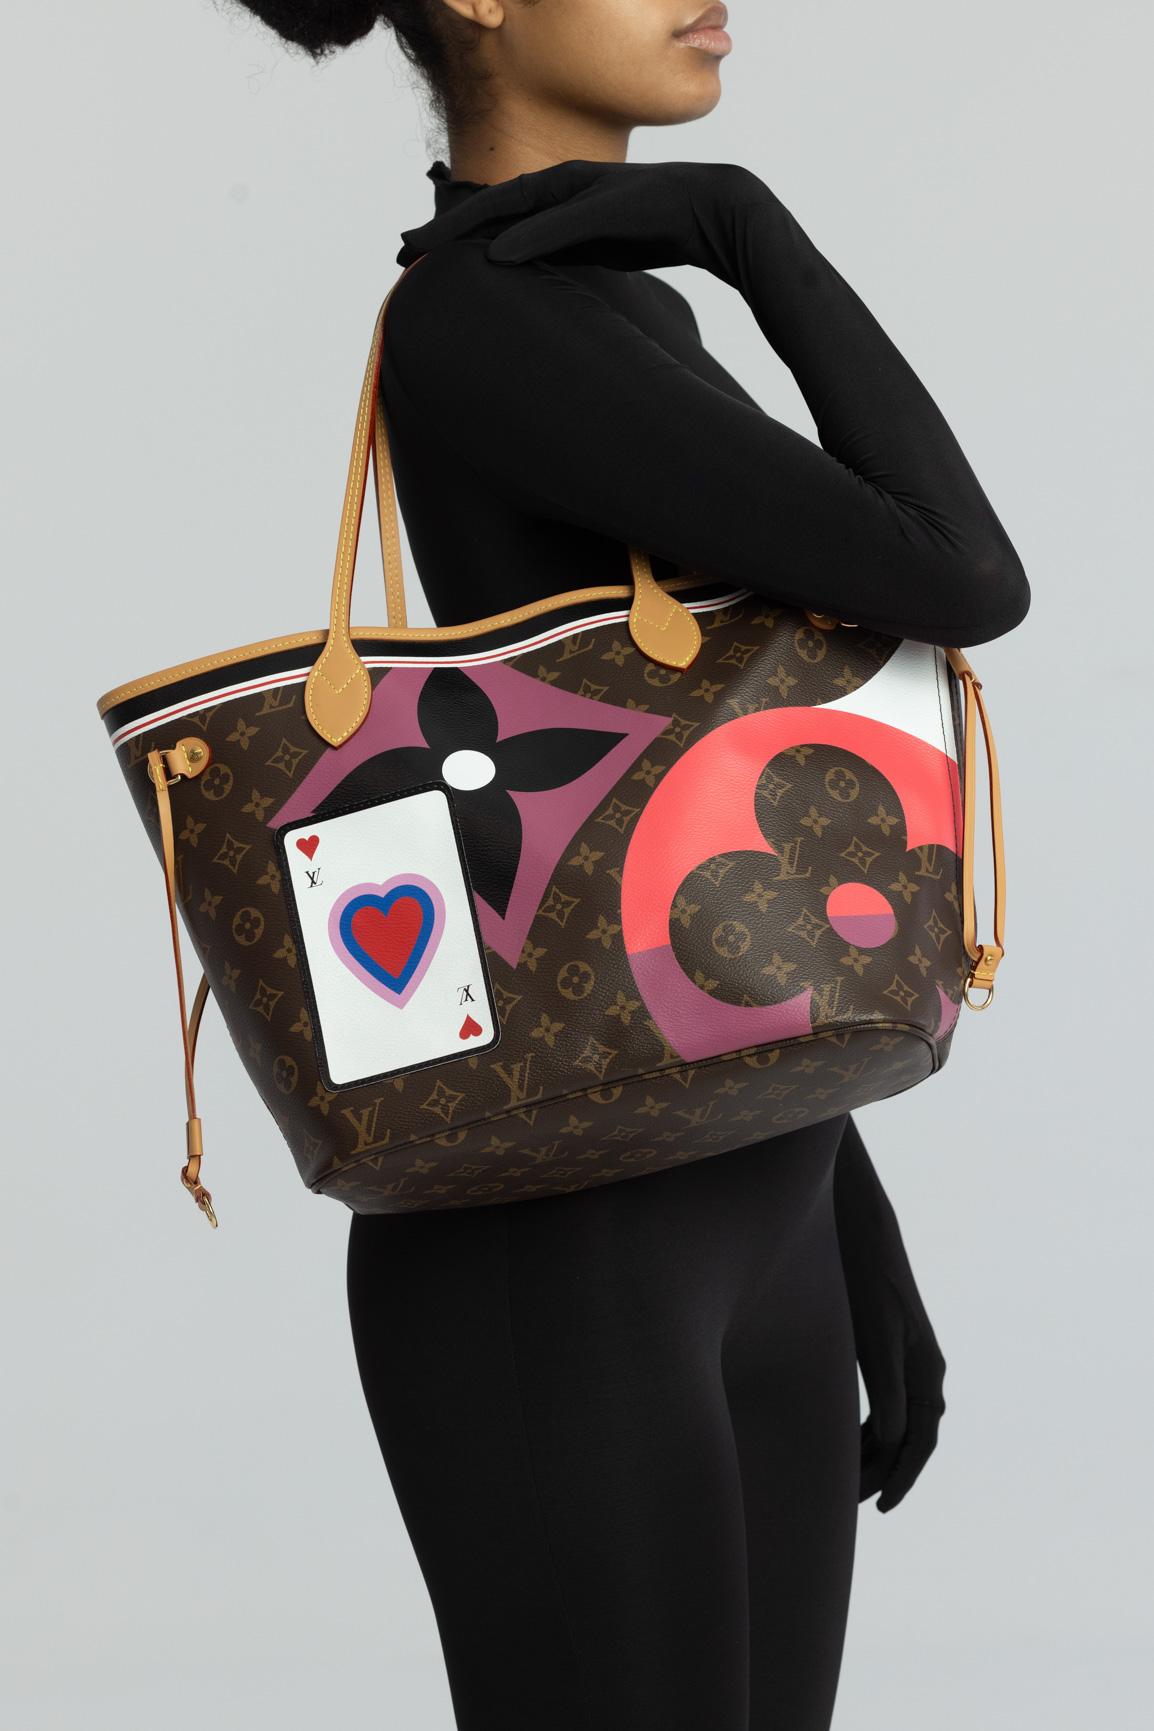 Louis Vuitton Monogram Game On Neverfull Mm Tote Bag In Excellent Condition For Sale In Montreal, Quebec